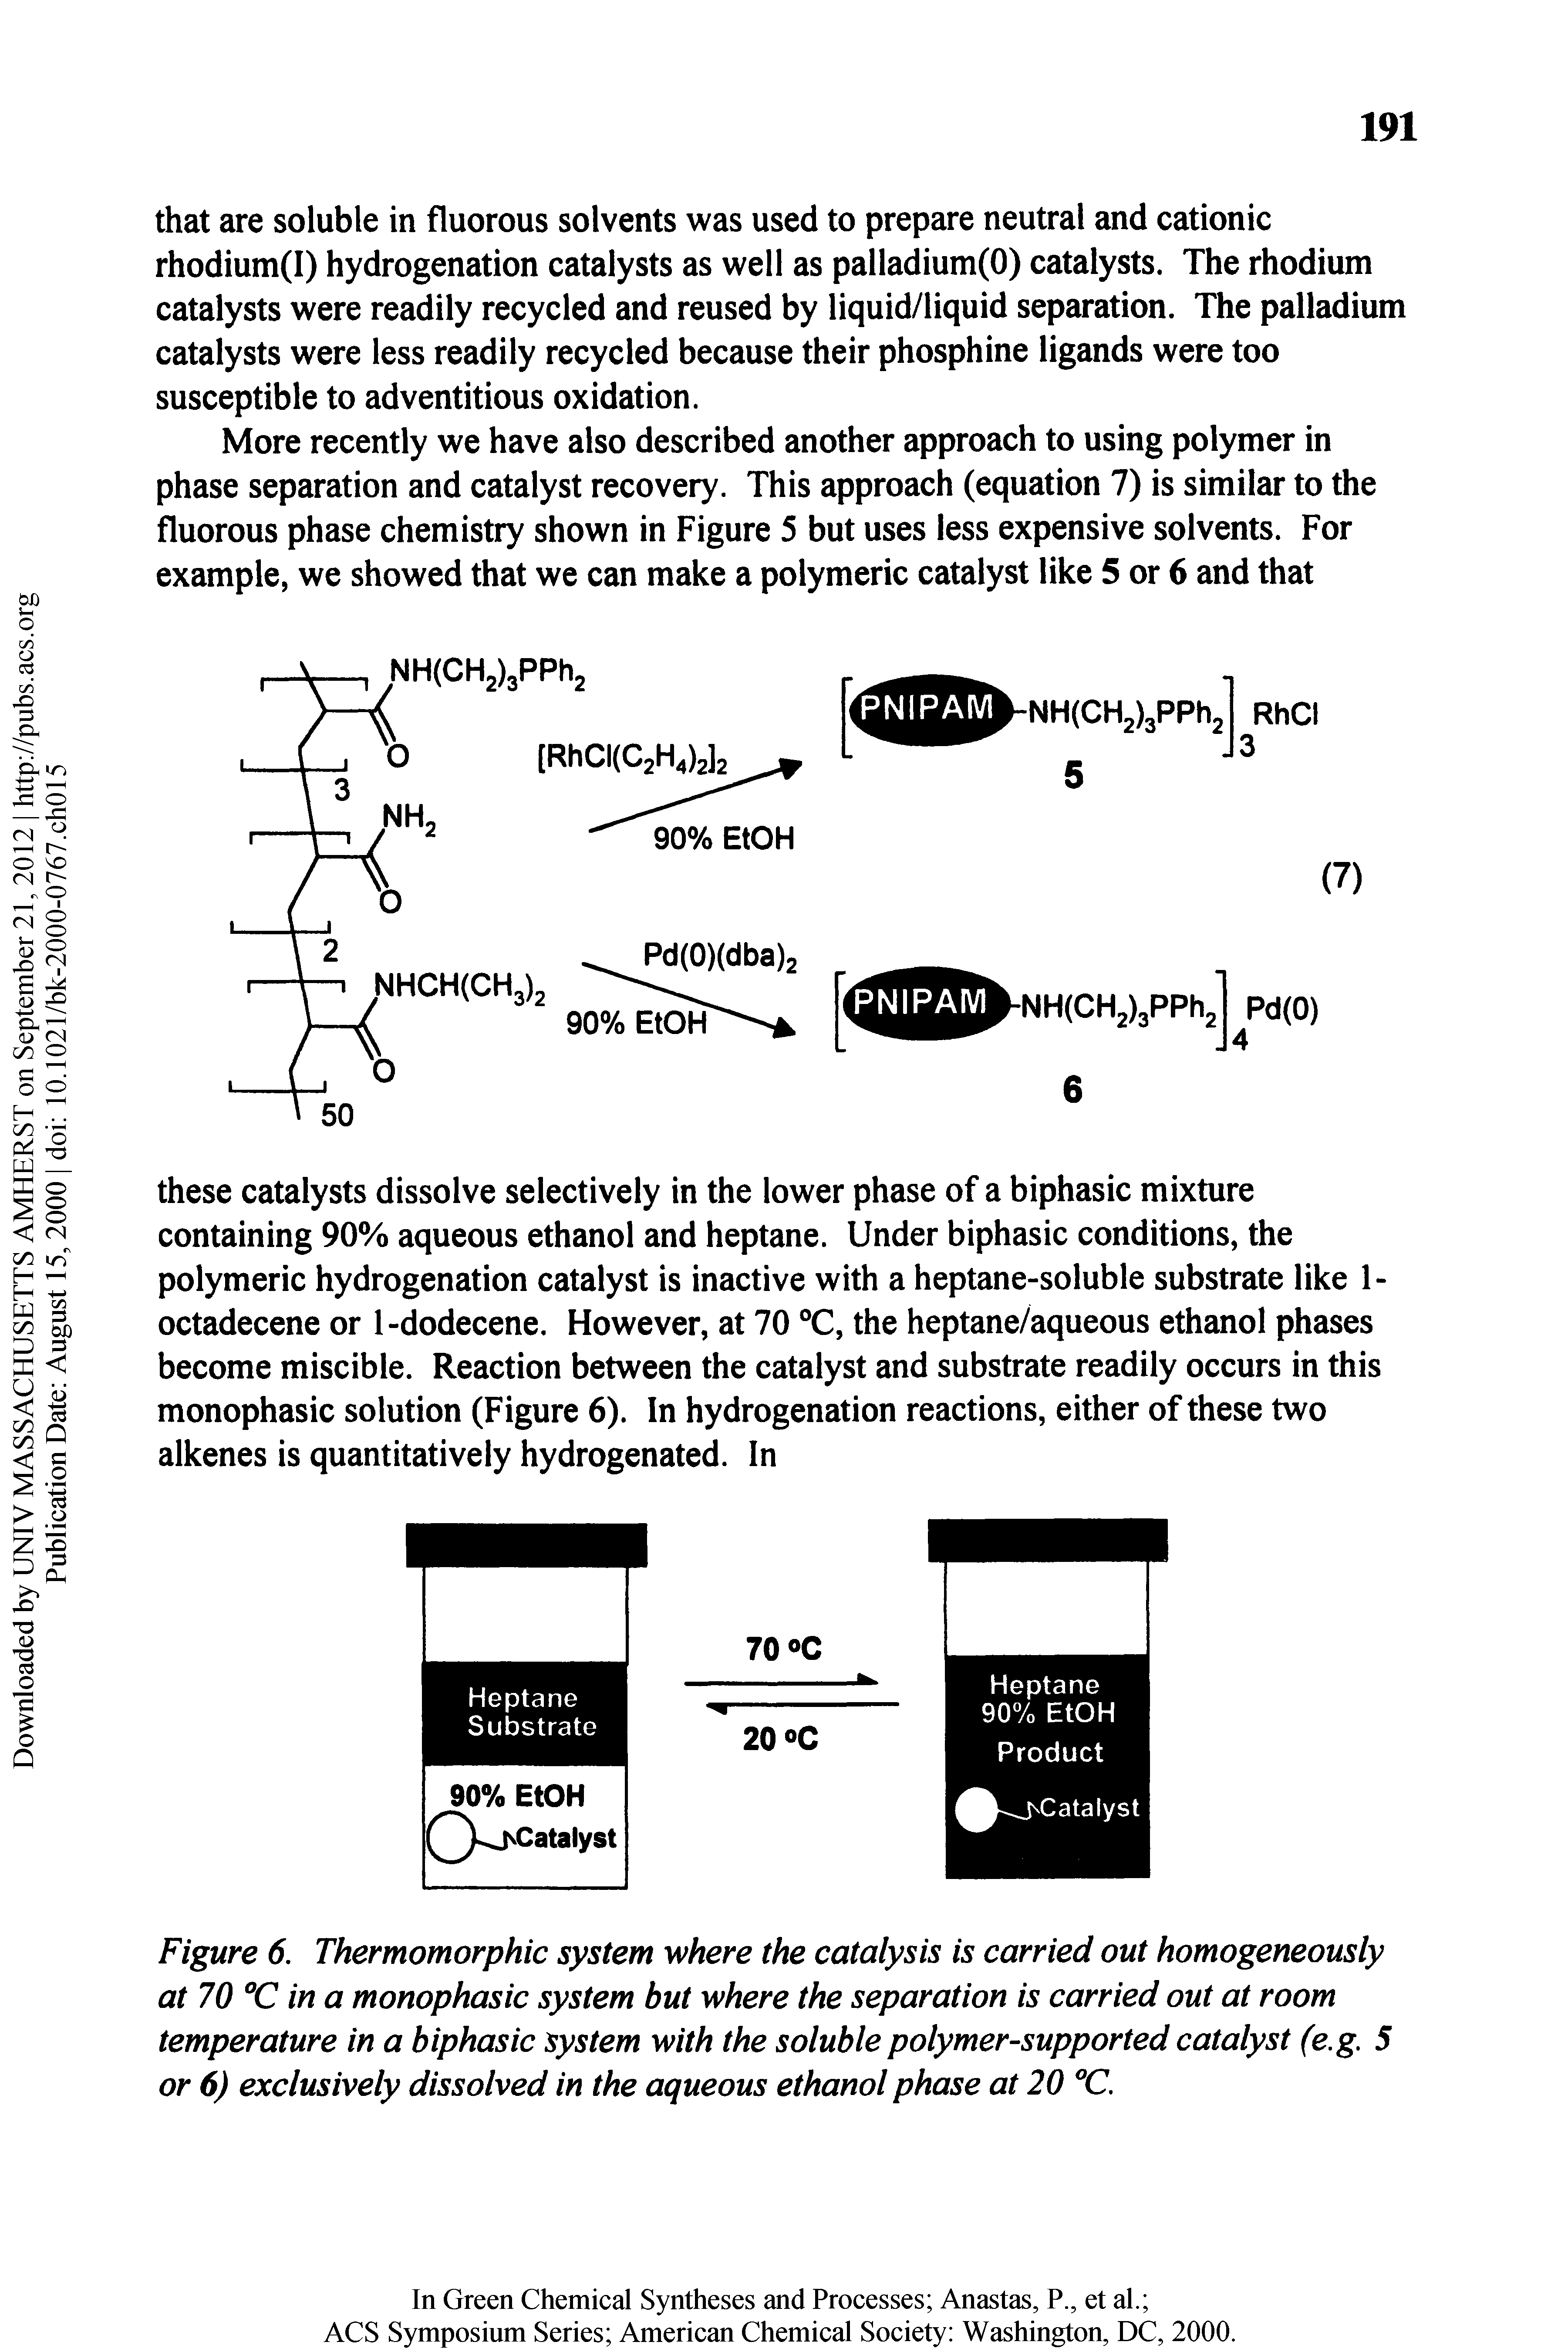 Figure 6. Thermomorphic system where the catalysis is carried out homogeneously at 70 °C in a monophasic system but where the separation is carried out at room temperature in a biphasic system with the soluble polymer-supported catalyst (e,g, 5 or 6) exclusively dissolved in the aqueous ethanol phase at 20...